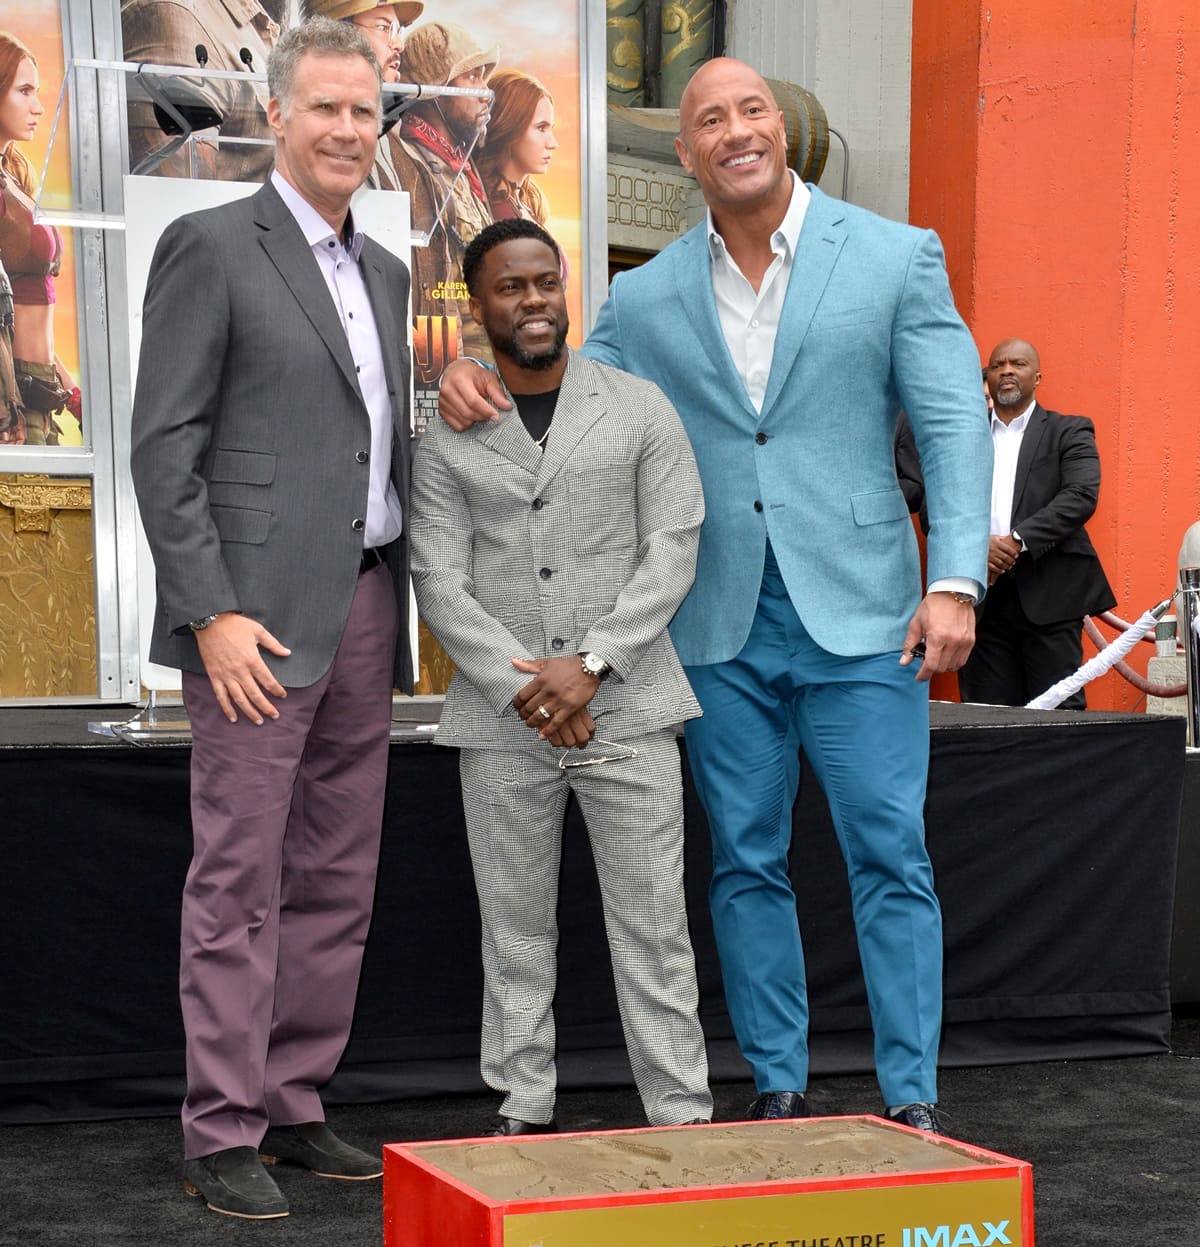 Dwayne Johnson is slightly shorter than Will Ferrell but much taller than his friend Kevin Hart